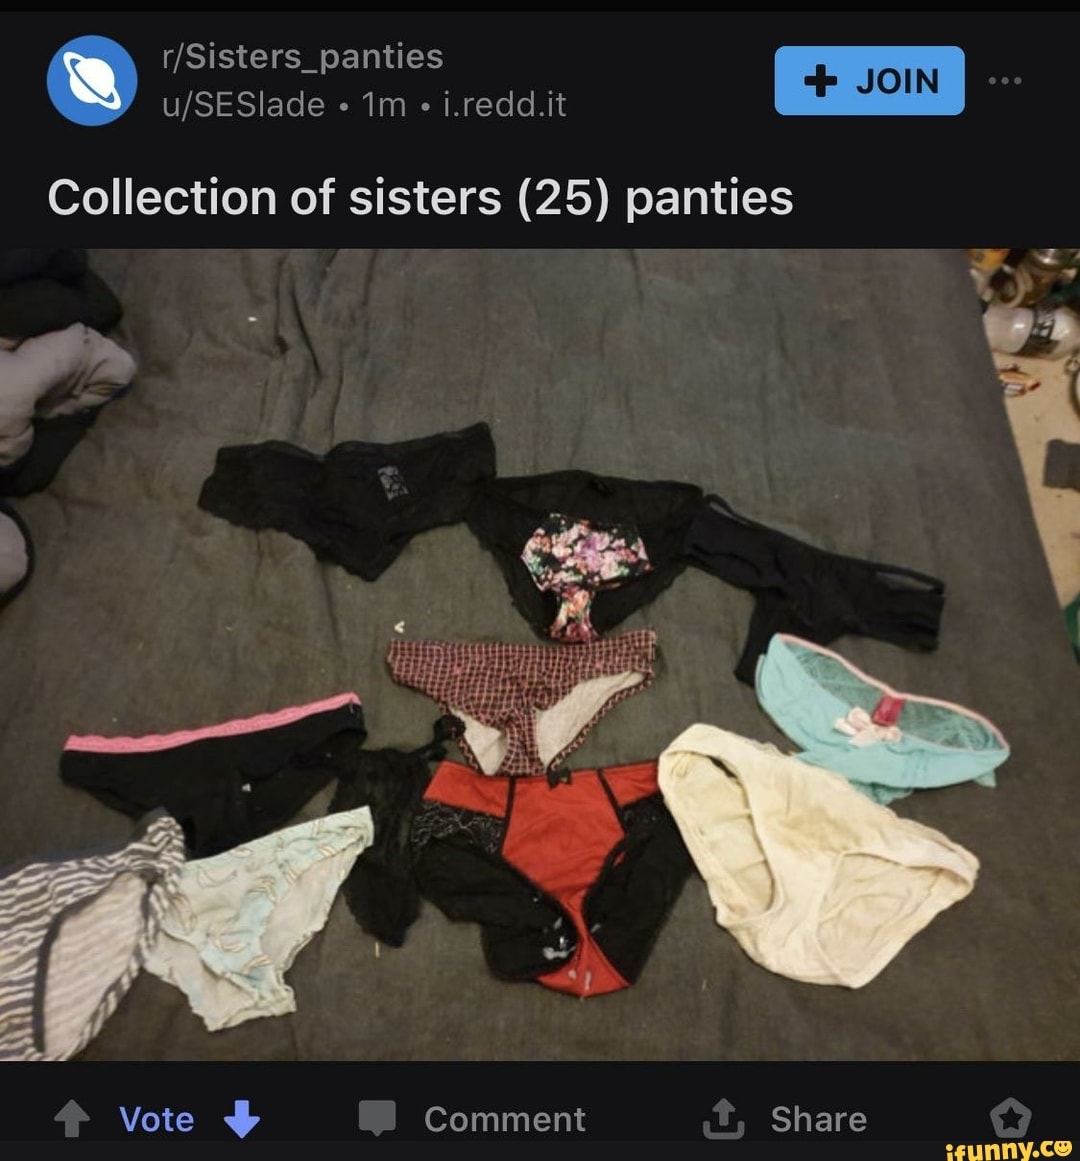 Gem r/Sisters panties u/SESlade E JOIN Collection of sisters